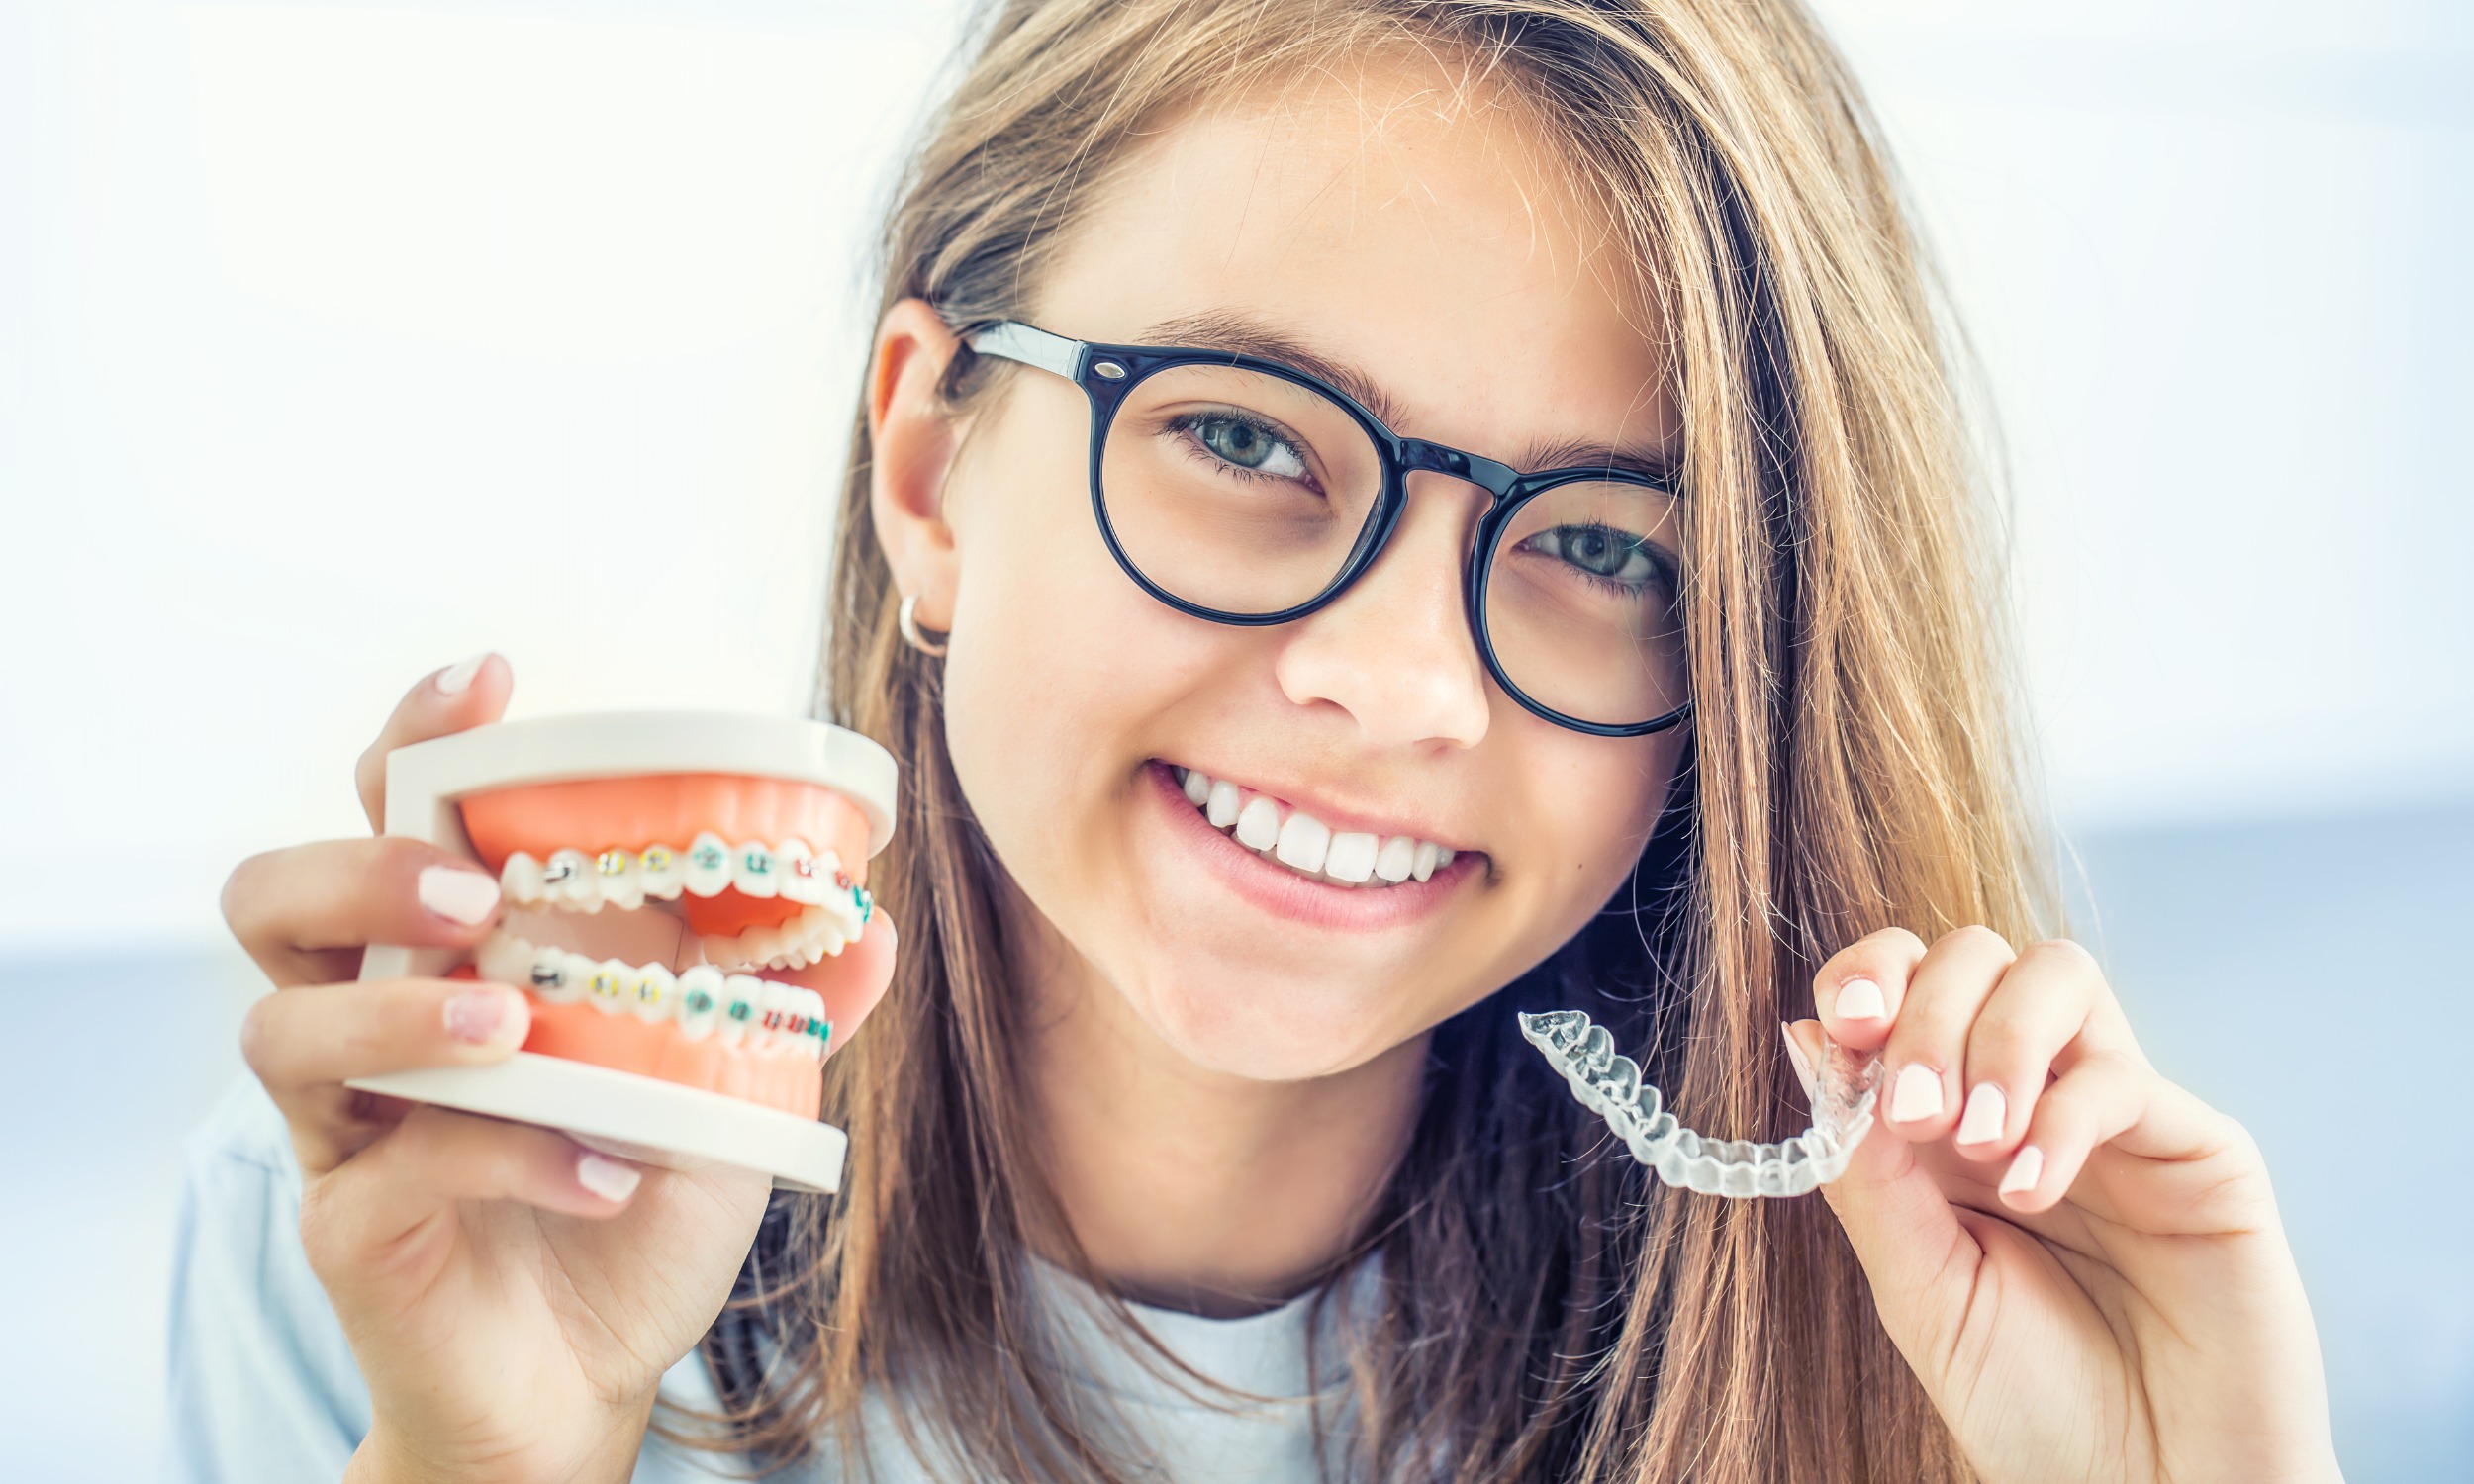 How To Choose The Right Kind Of Braces